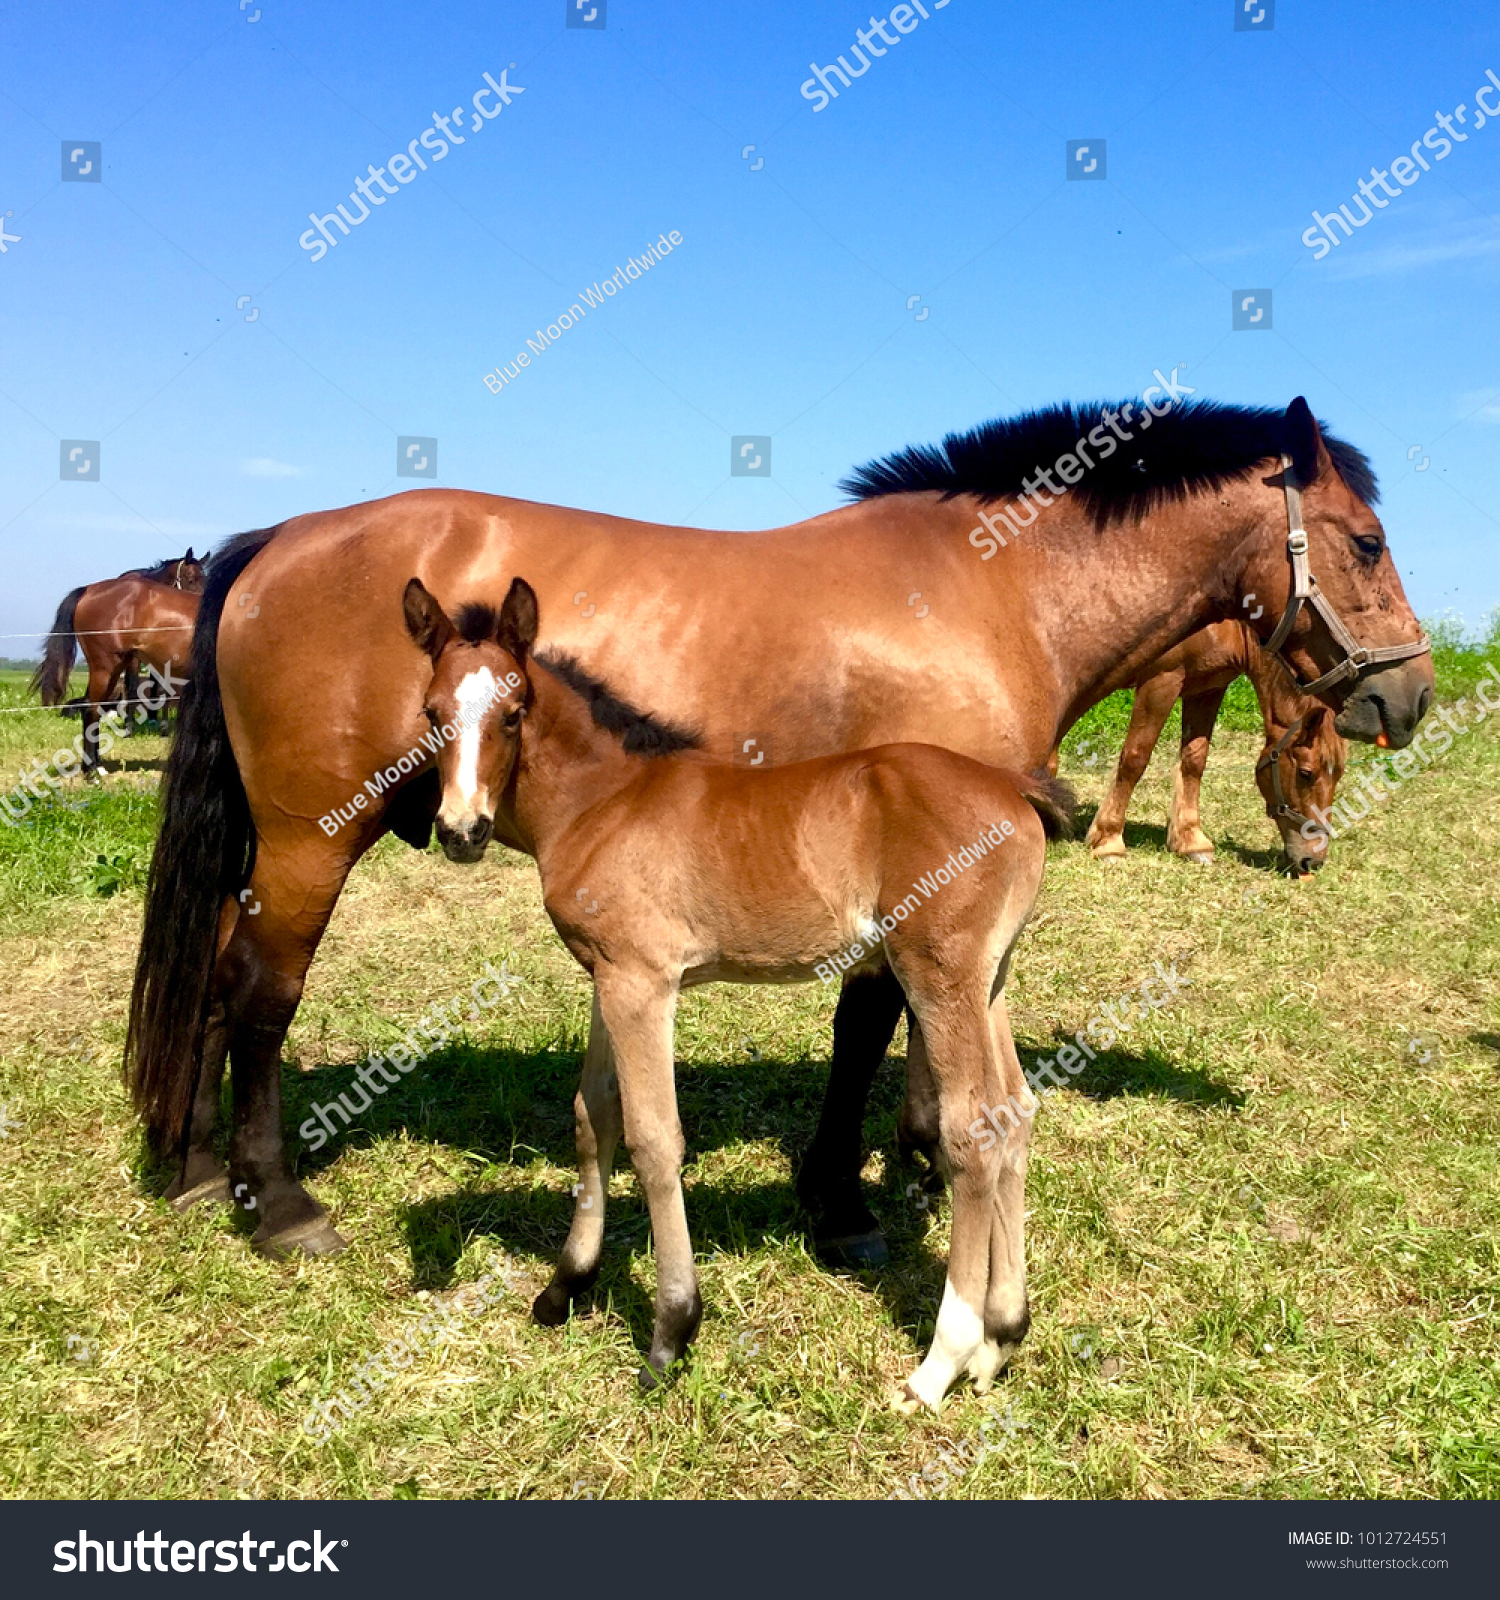 Two Weeks Old Colt Her Mom Stock Photo (Royalty Free) 1012724551 ...